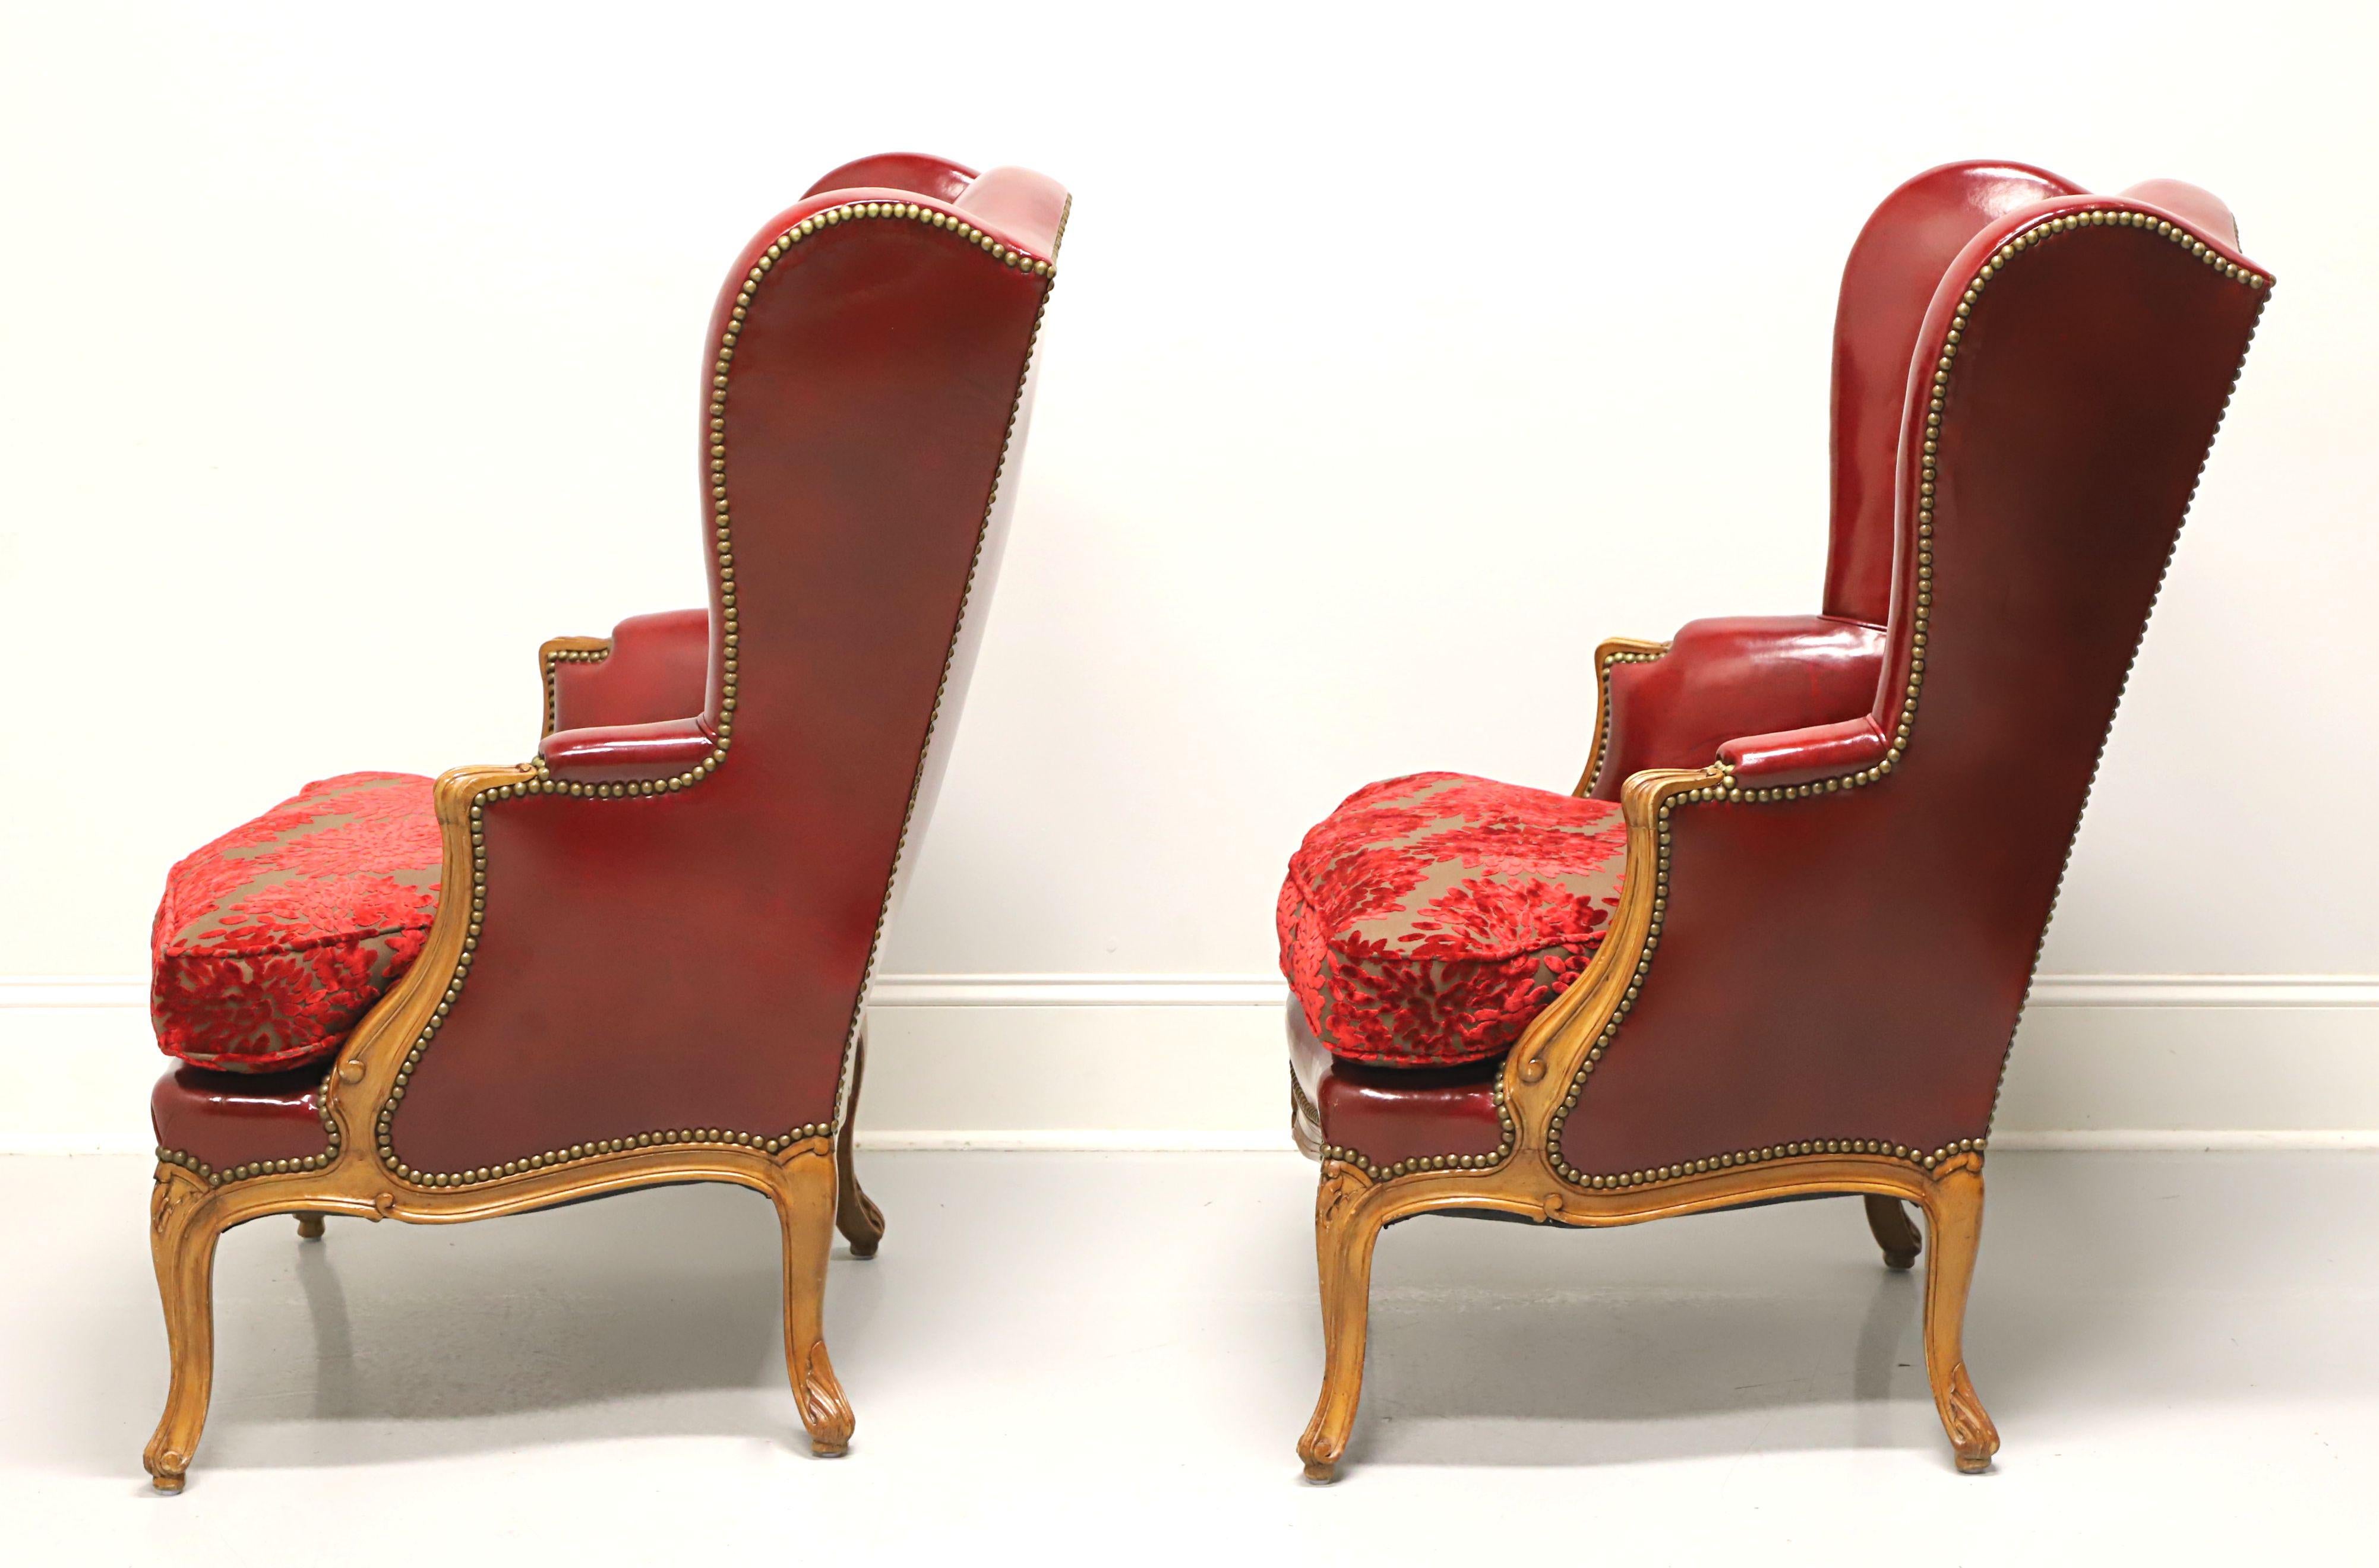 Late 19th Century French Provincial Louis XV Red Leather Wing Back Chairs - Pair 1